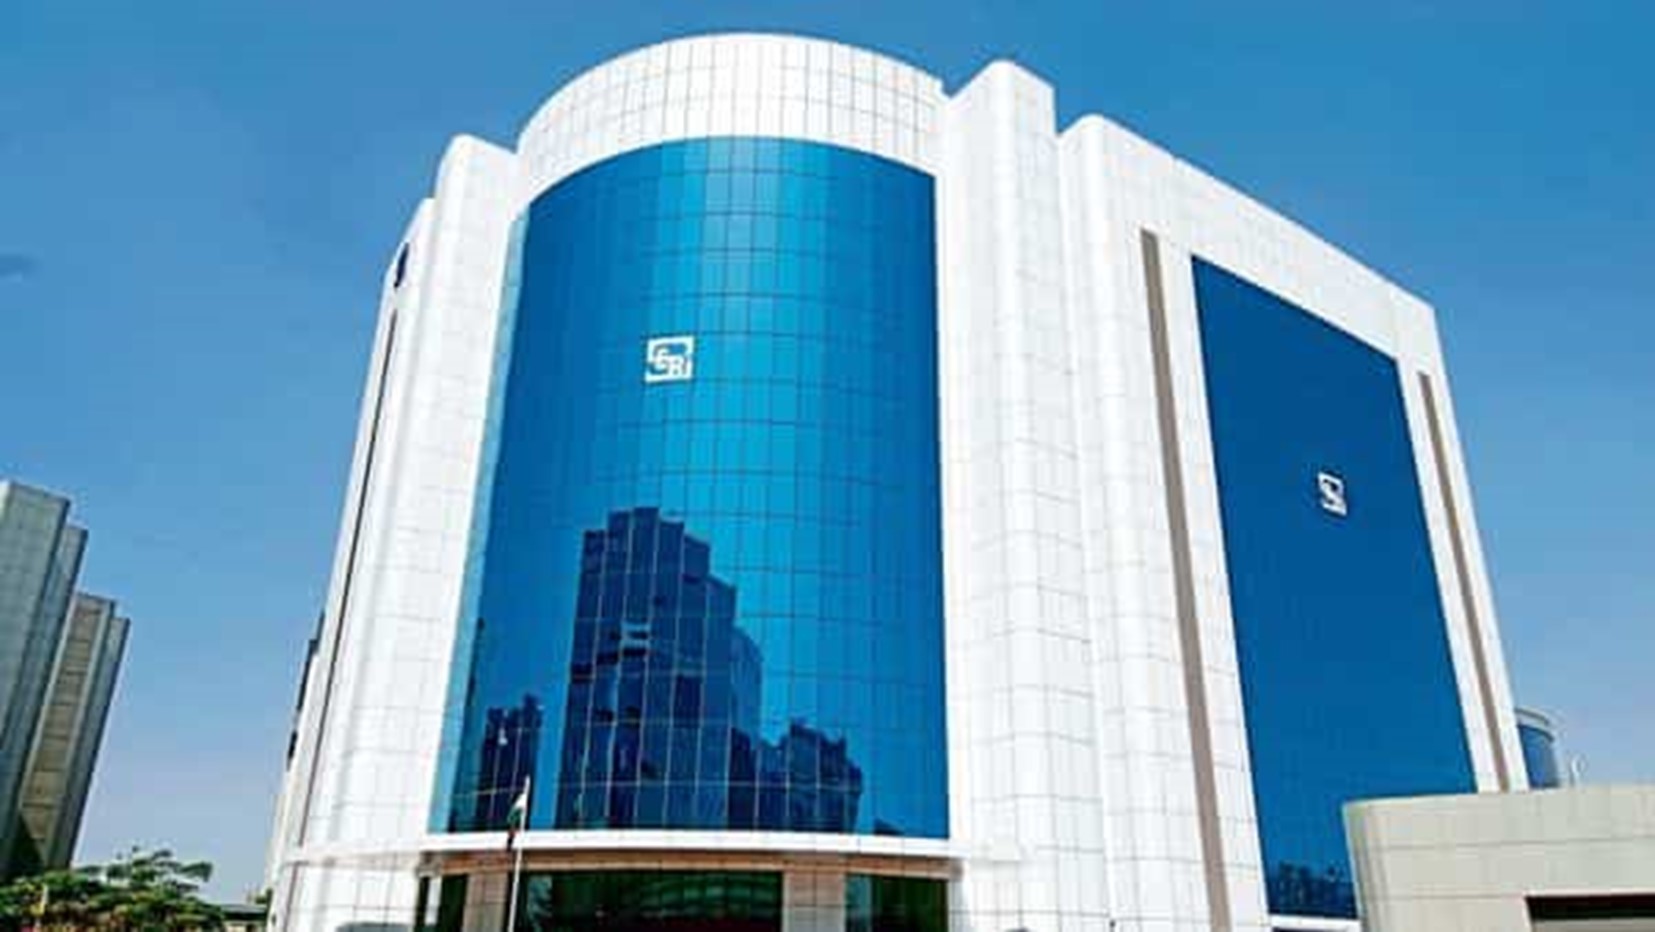 SEBI has intensified its efforts in order to reduce loss to investor from technical glitches